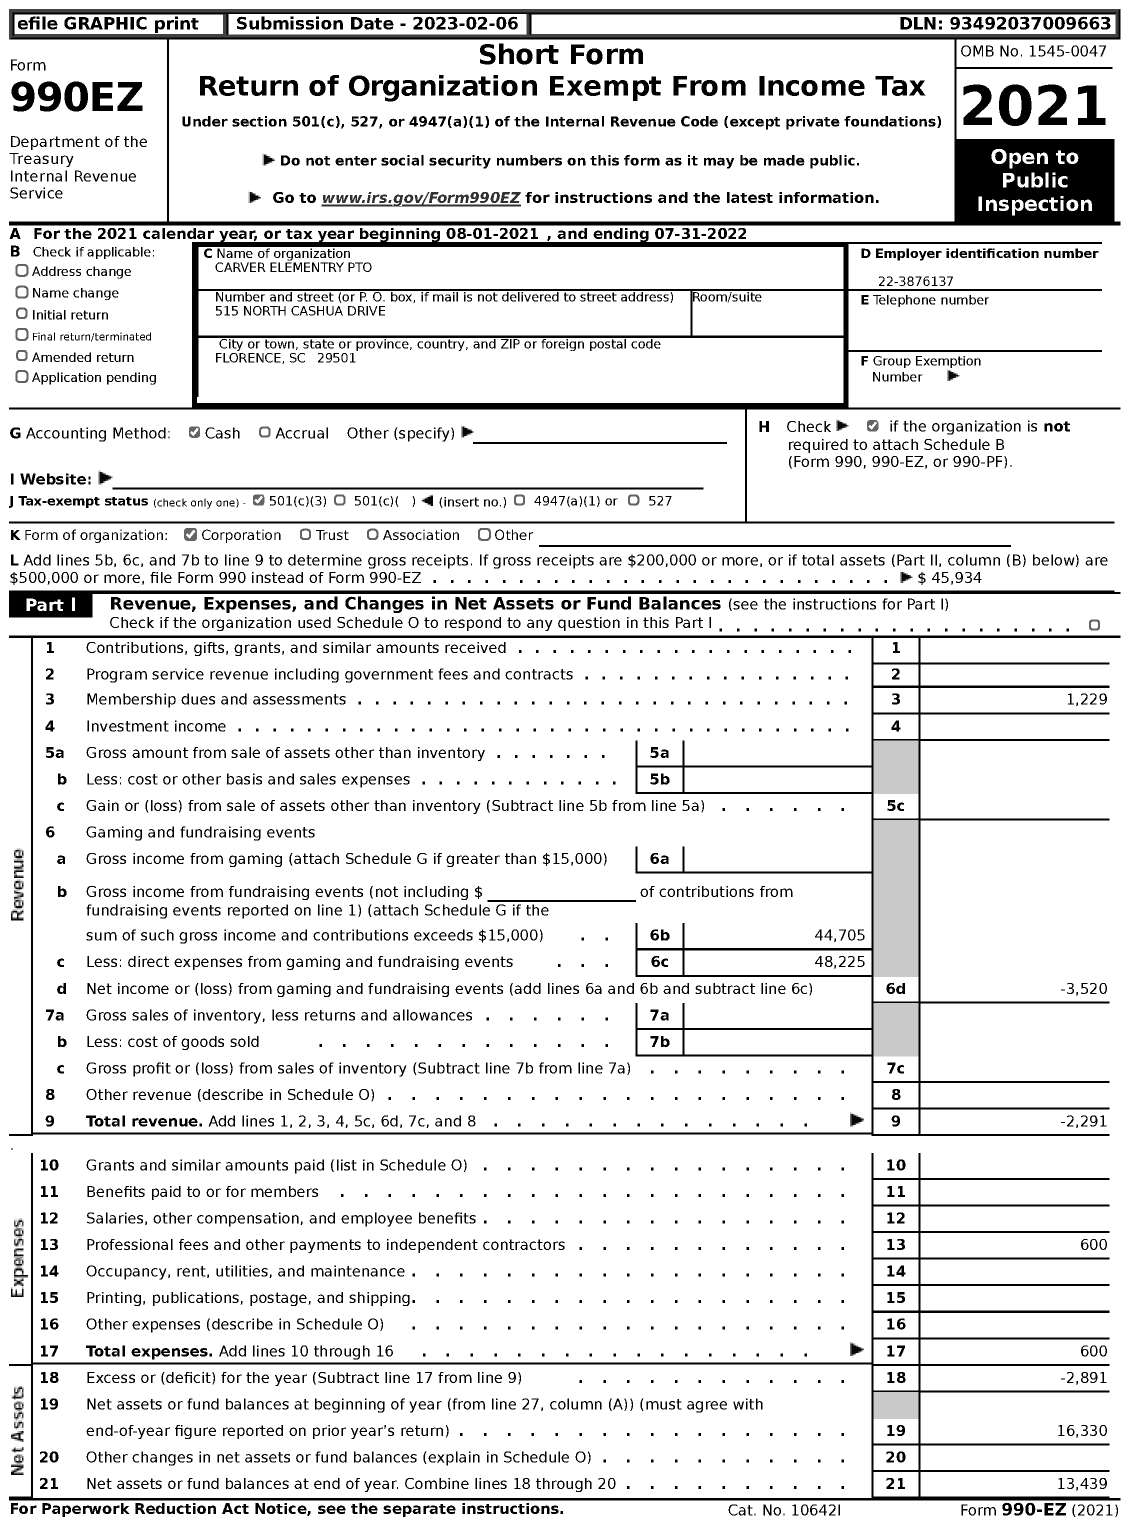 Image of first page of 2021 Form 990EZ for Carver Elementry Pto